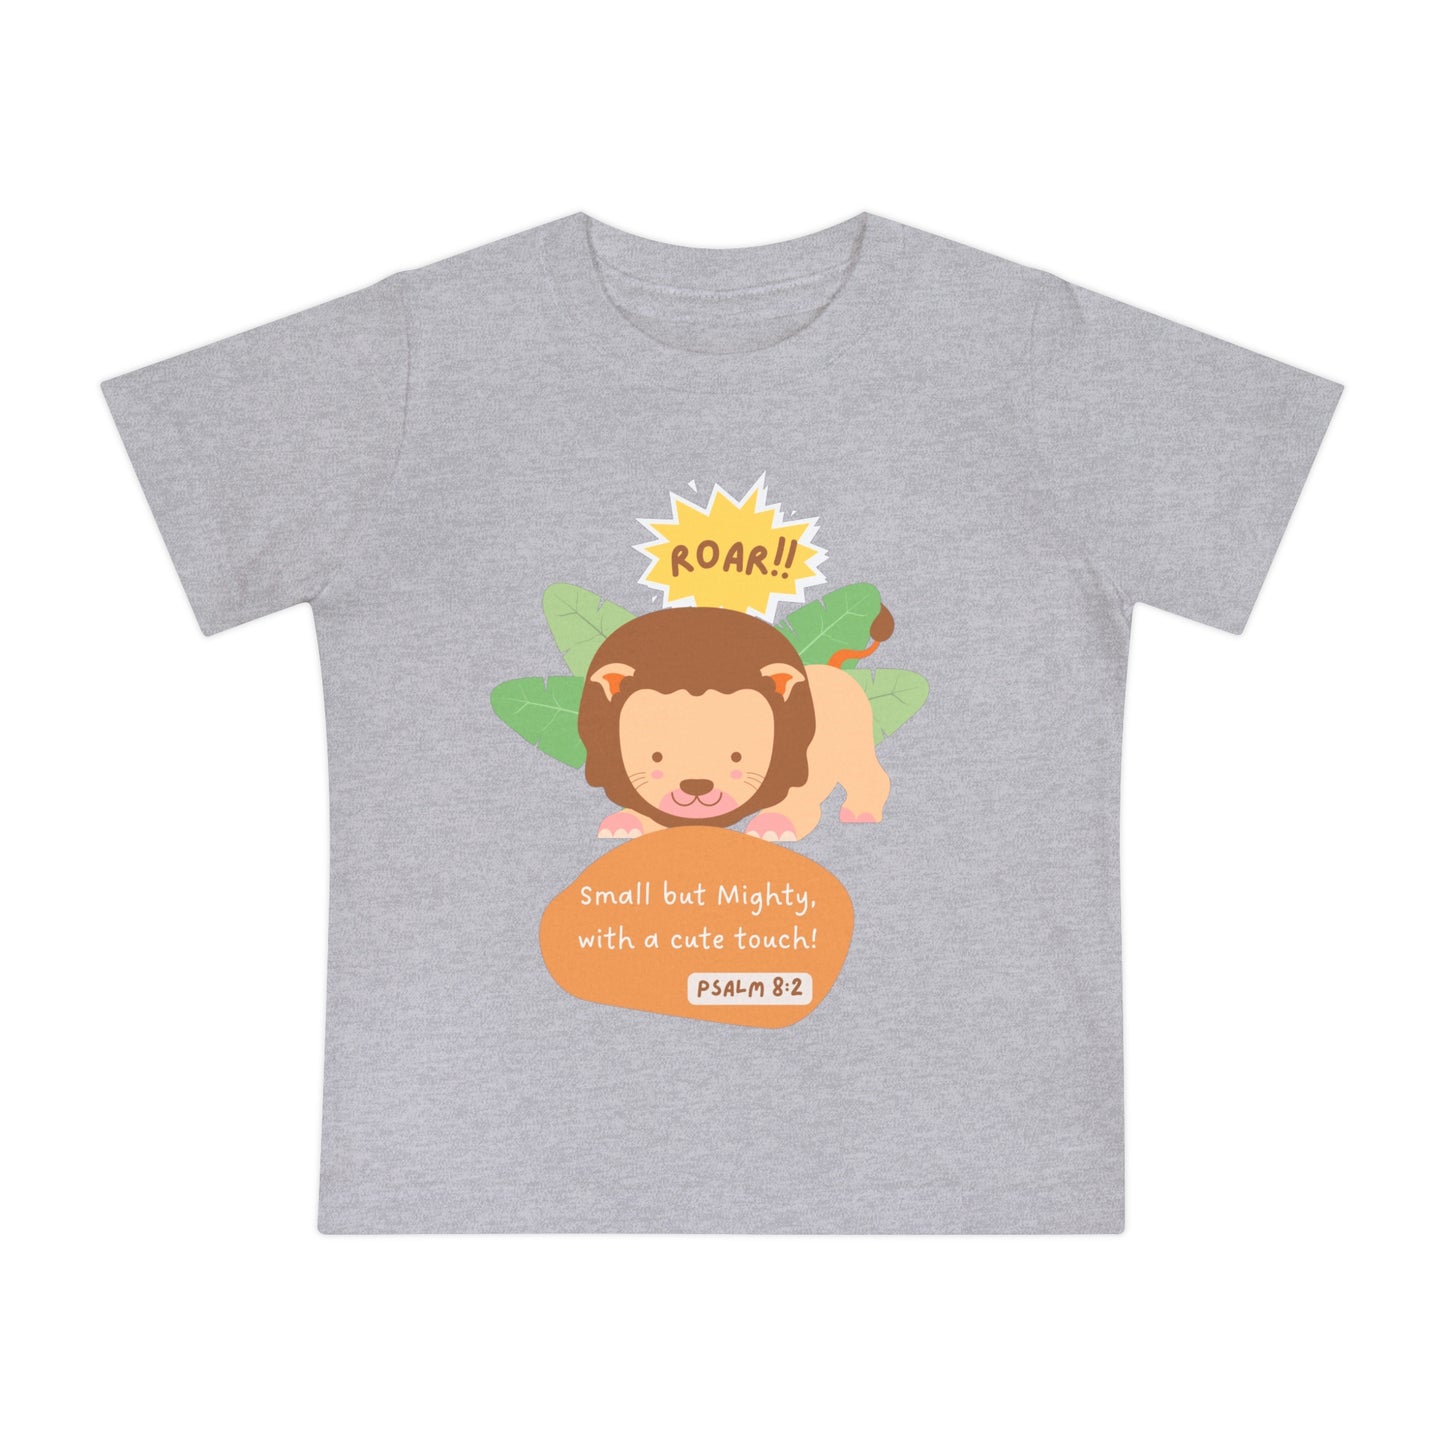 Tiny But Might - Toddler Short Sleeve Tee